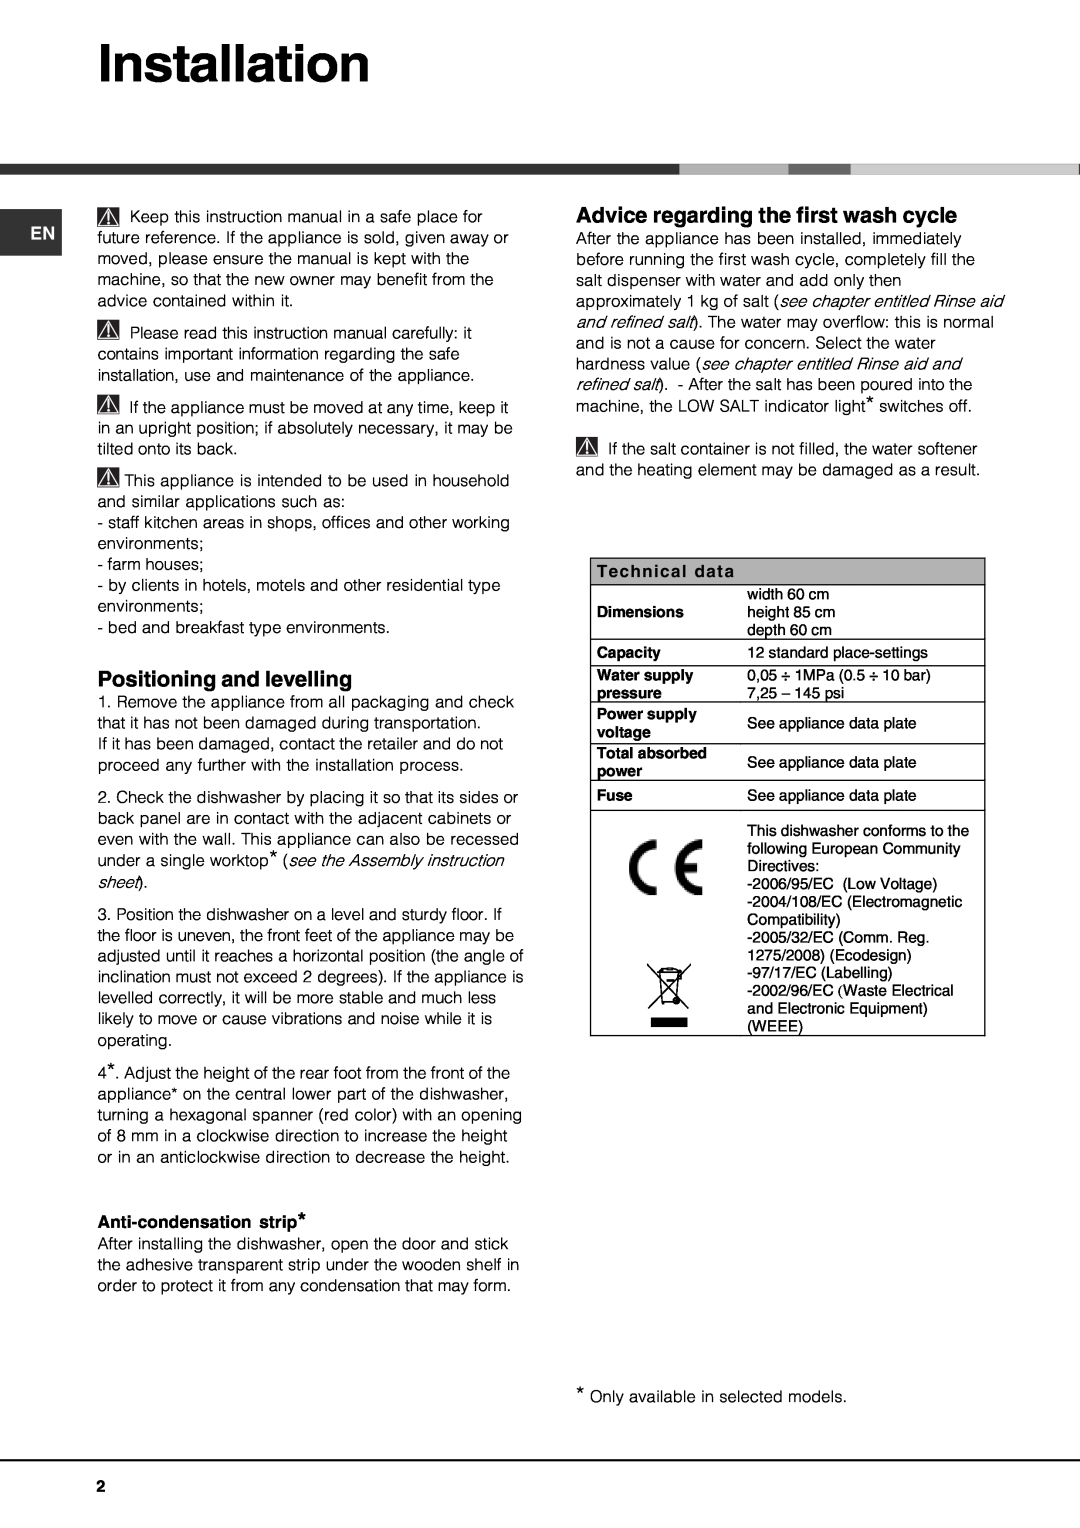 Hotpoint FDM550PR manual Installation, Positioning and levelling, Advice regarding the first wash cycle, Technical data 